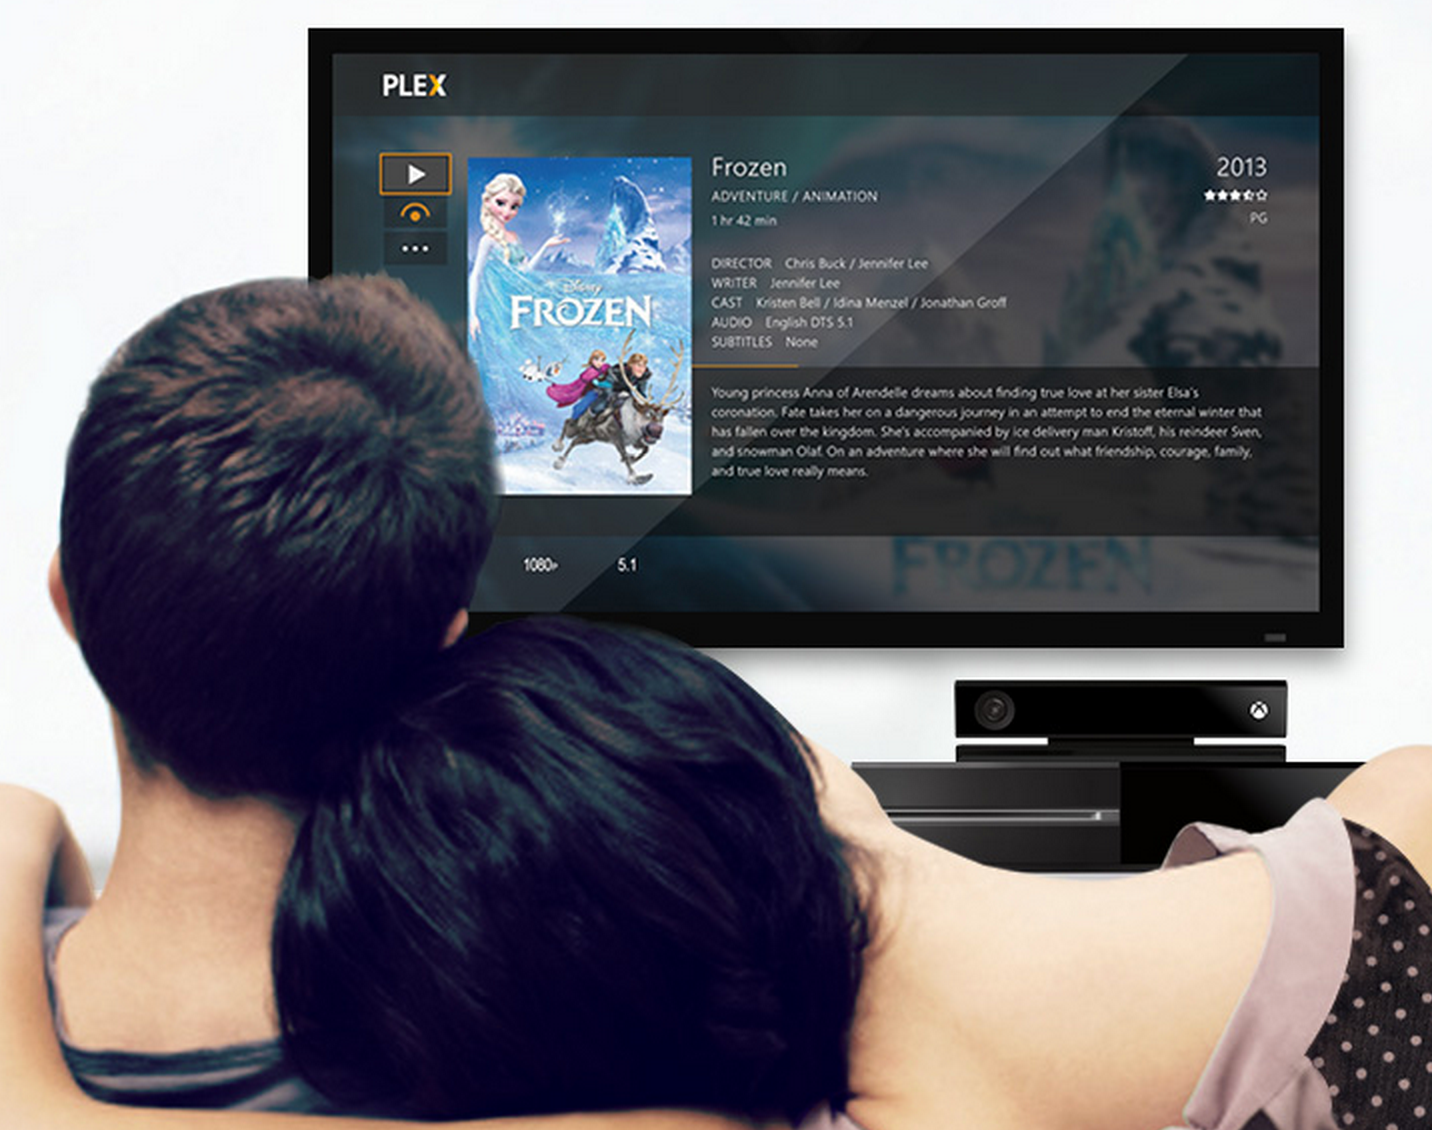 getting started with plex how to set up plex to stream stuff to your xbox one image 1